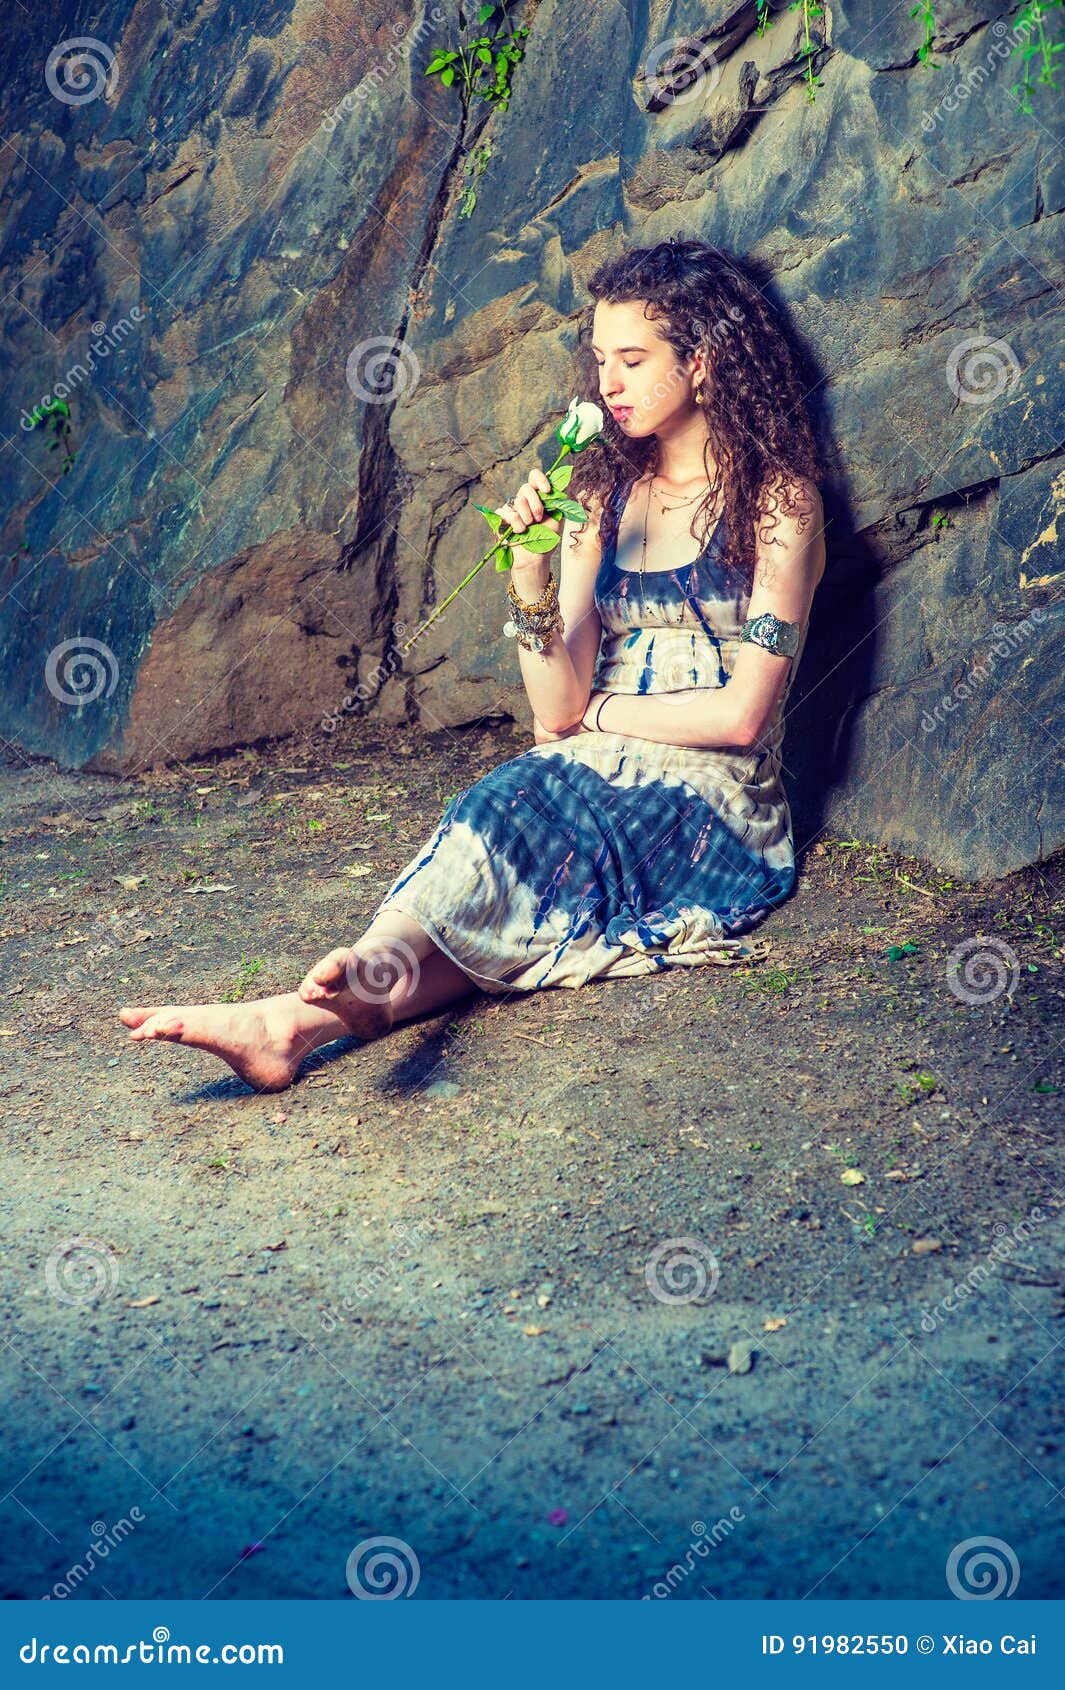 https://thumbs.dreamstime.com/z/young-american-woman-missing-you-white-rose-new-york-memory-teenage-girl-curly-long-hair-wearing-patterned-long-dress-91982550.jpg